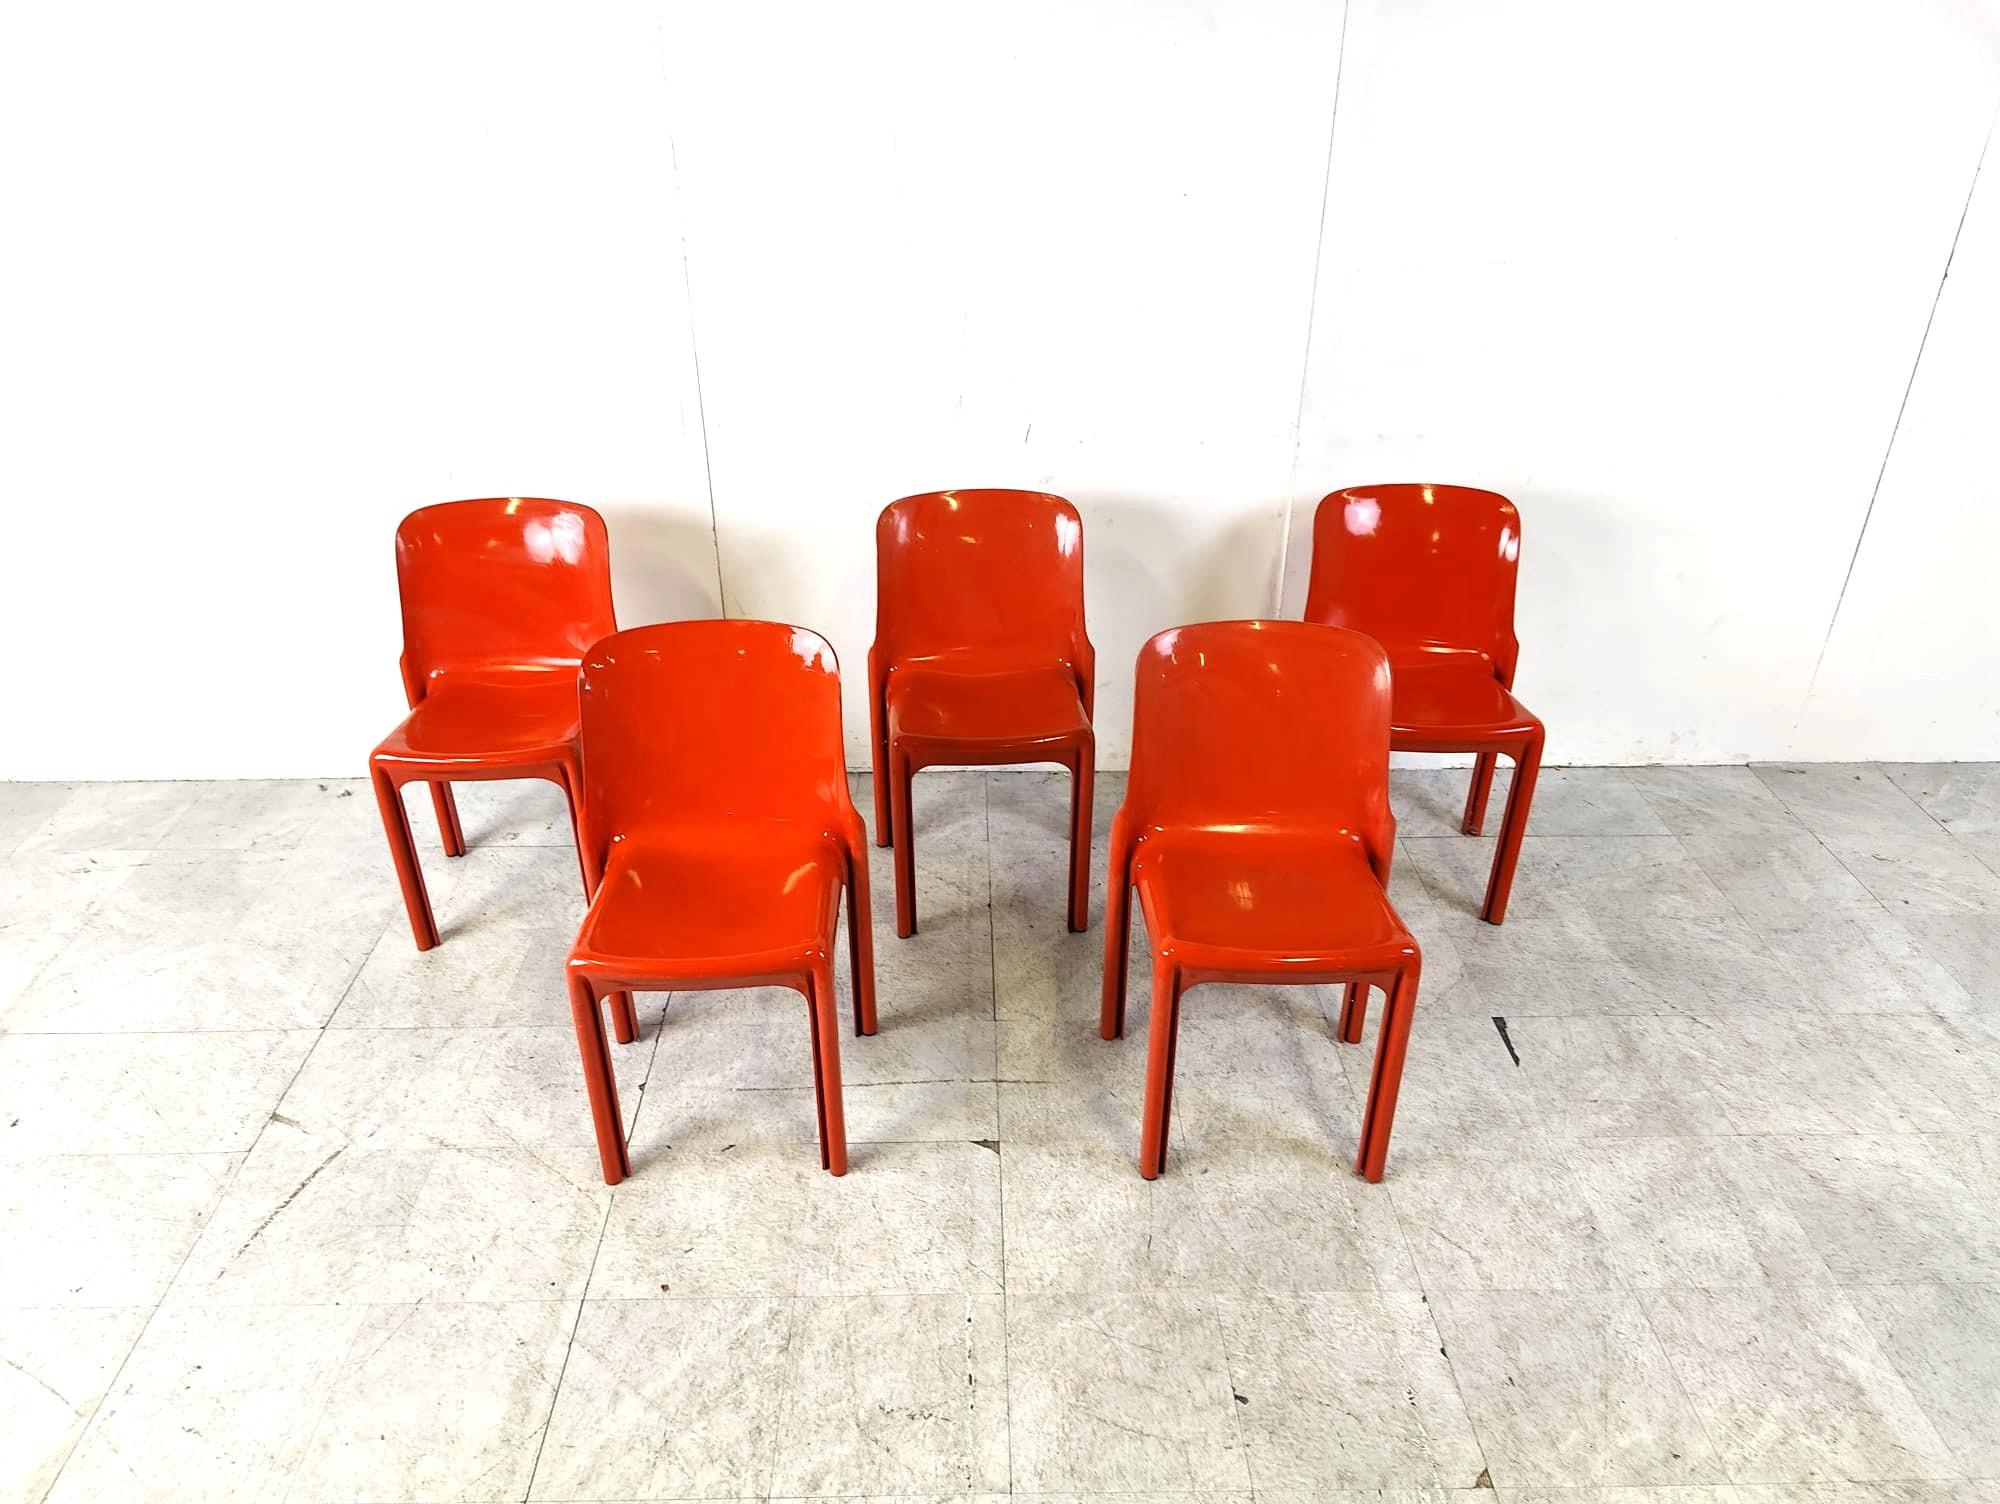 Space Age Set of 5 Selene dining chairs by Vico Magistretti for Artemide, 1970s For Sale